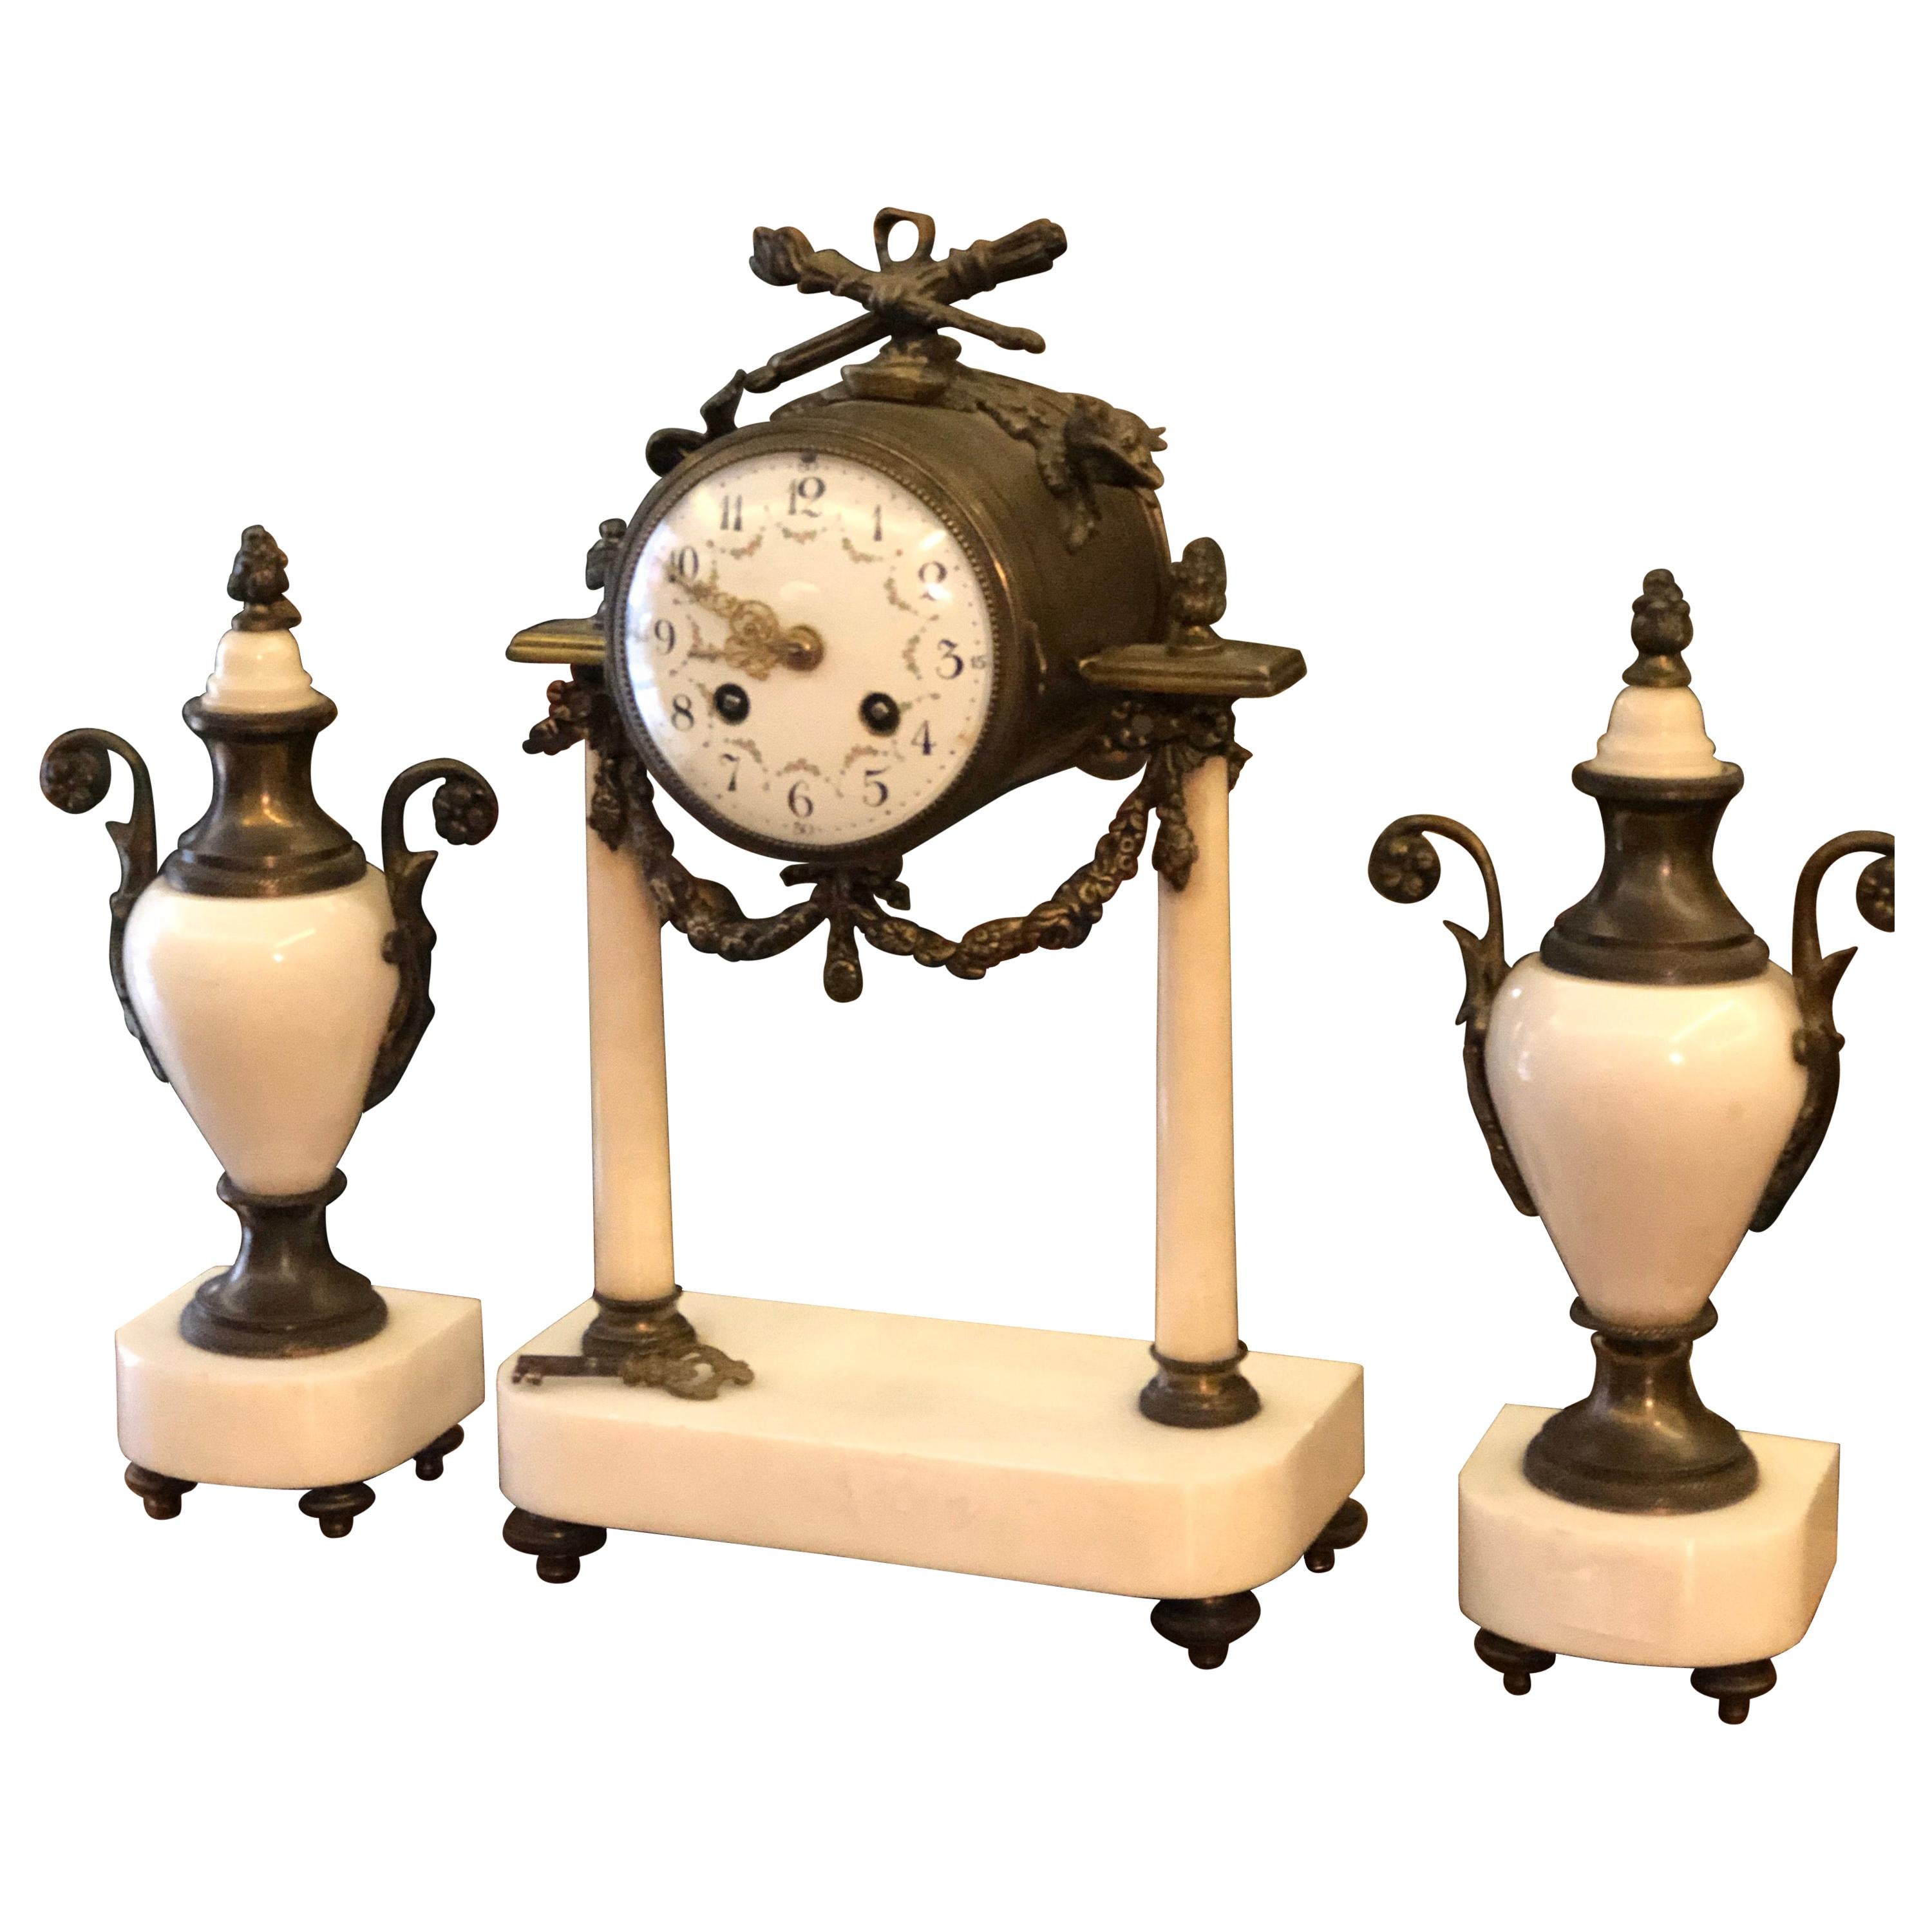 19th Century Bronze Mantel Clock Raised on a Marble Stand with Two Marble Urns